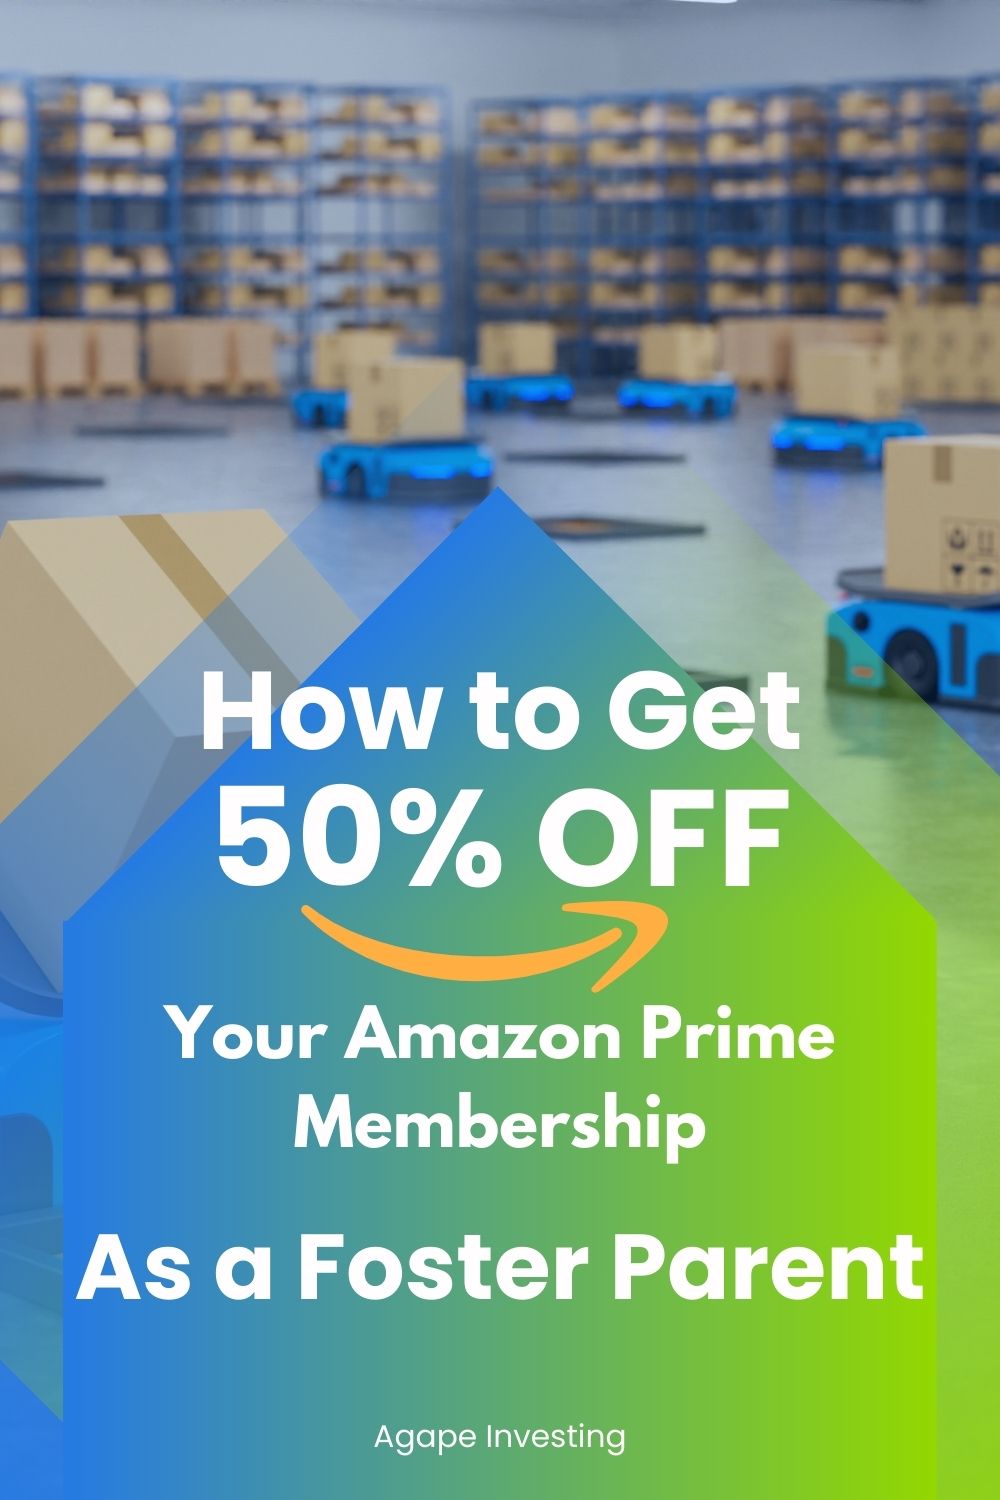 Did you know that there is an Amazon Prime Membership Discount for Foster Parents? Check out this article to learn How to Get Amazon Prime Membership Discount for Foster Parents. Over 50% off of your Amazon Prime Membership fees as a foster parent. Learn everything you need to know to secure this discount and start saving more money as a foster family!